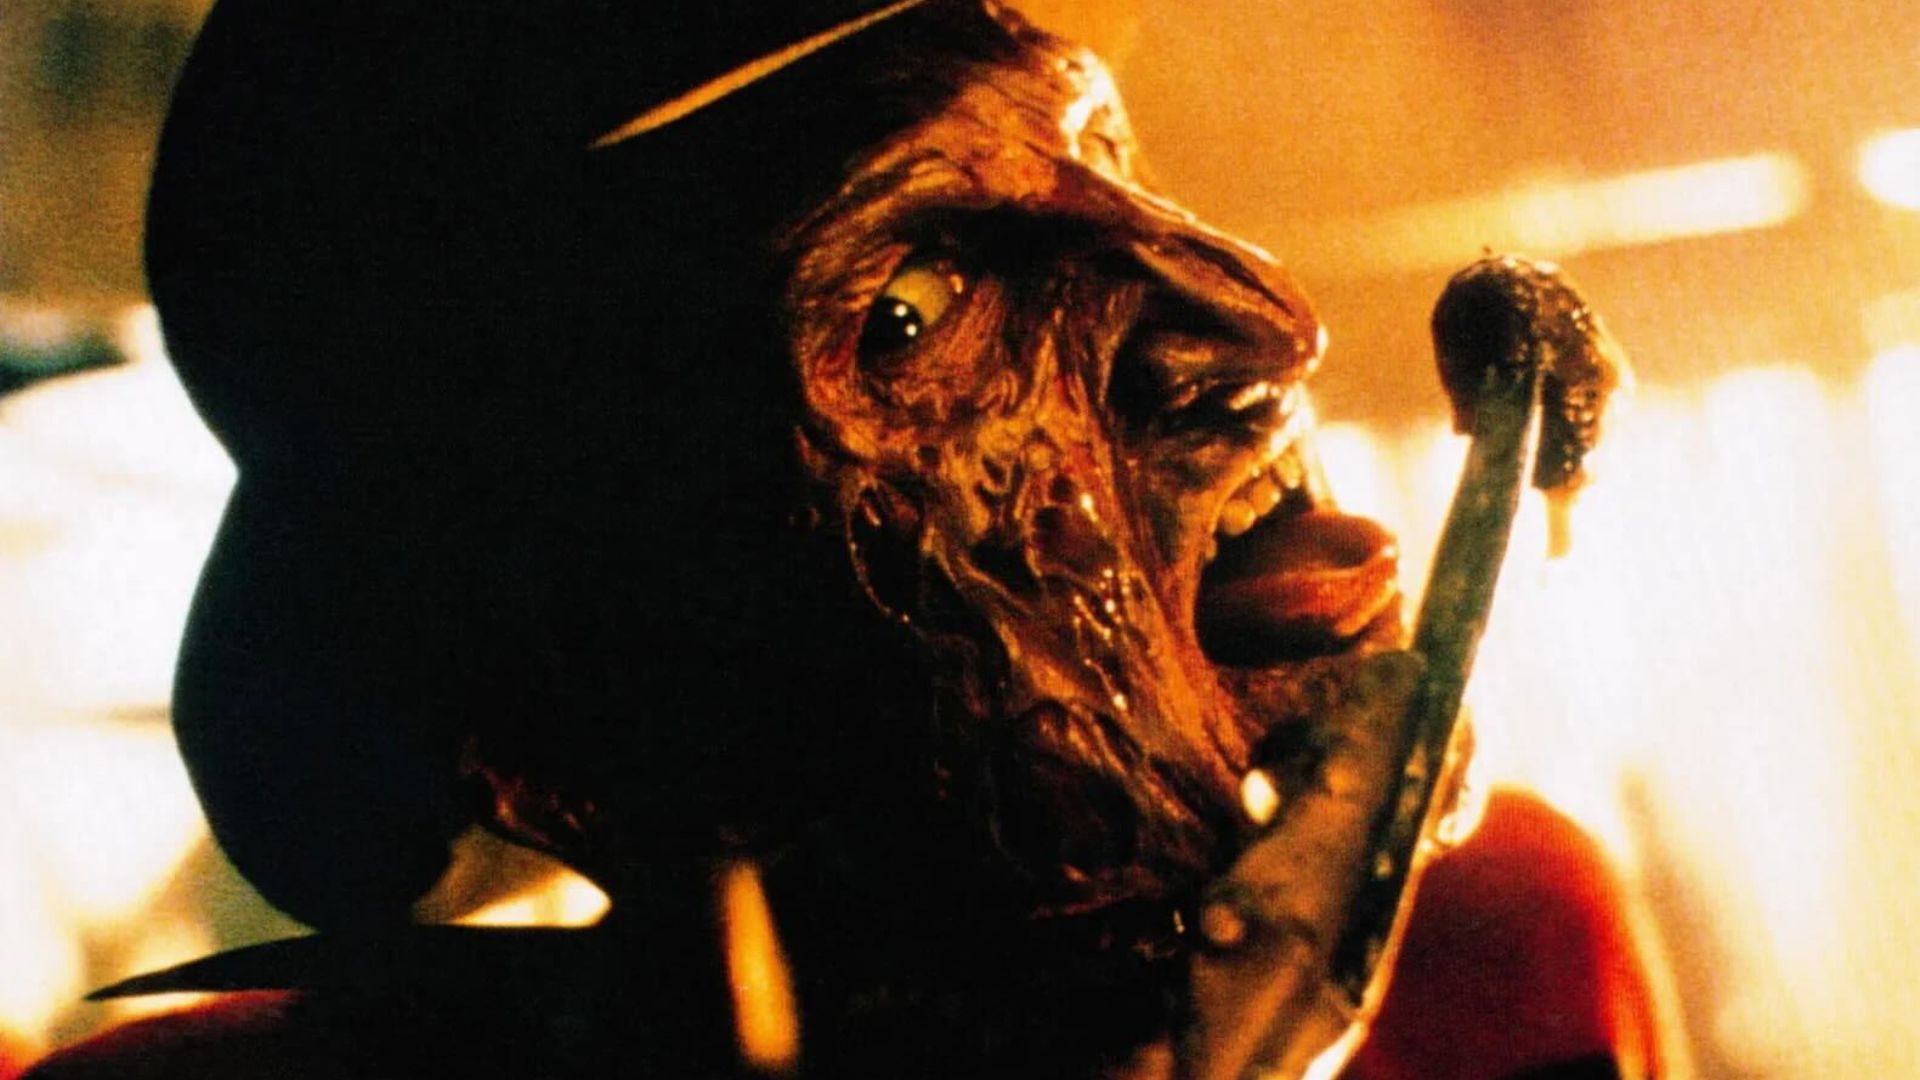 Freddy Kreuger licking his bloody sharp razor fingers in A Nightmare on Elm Street